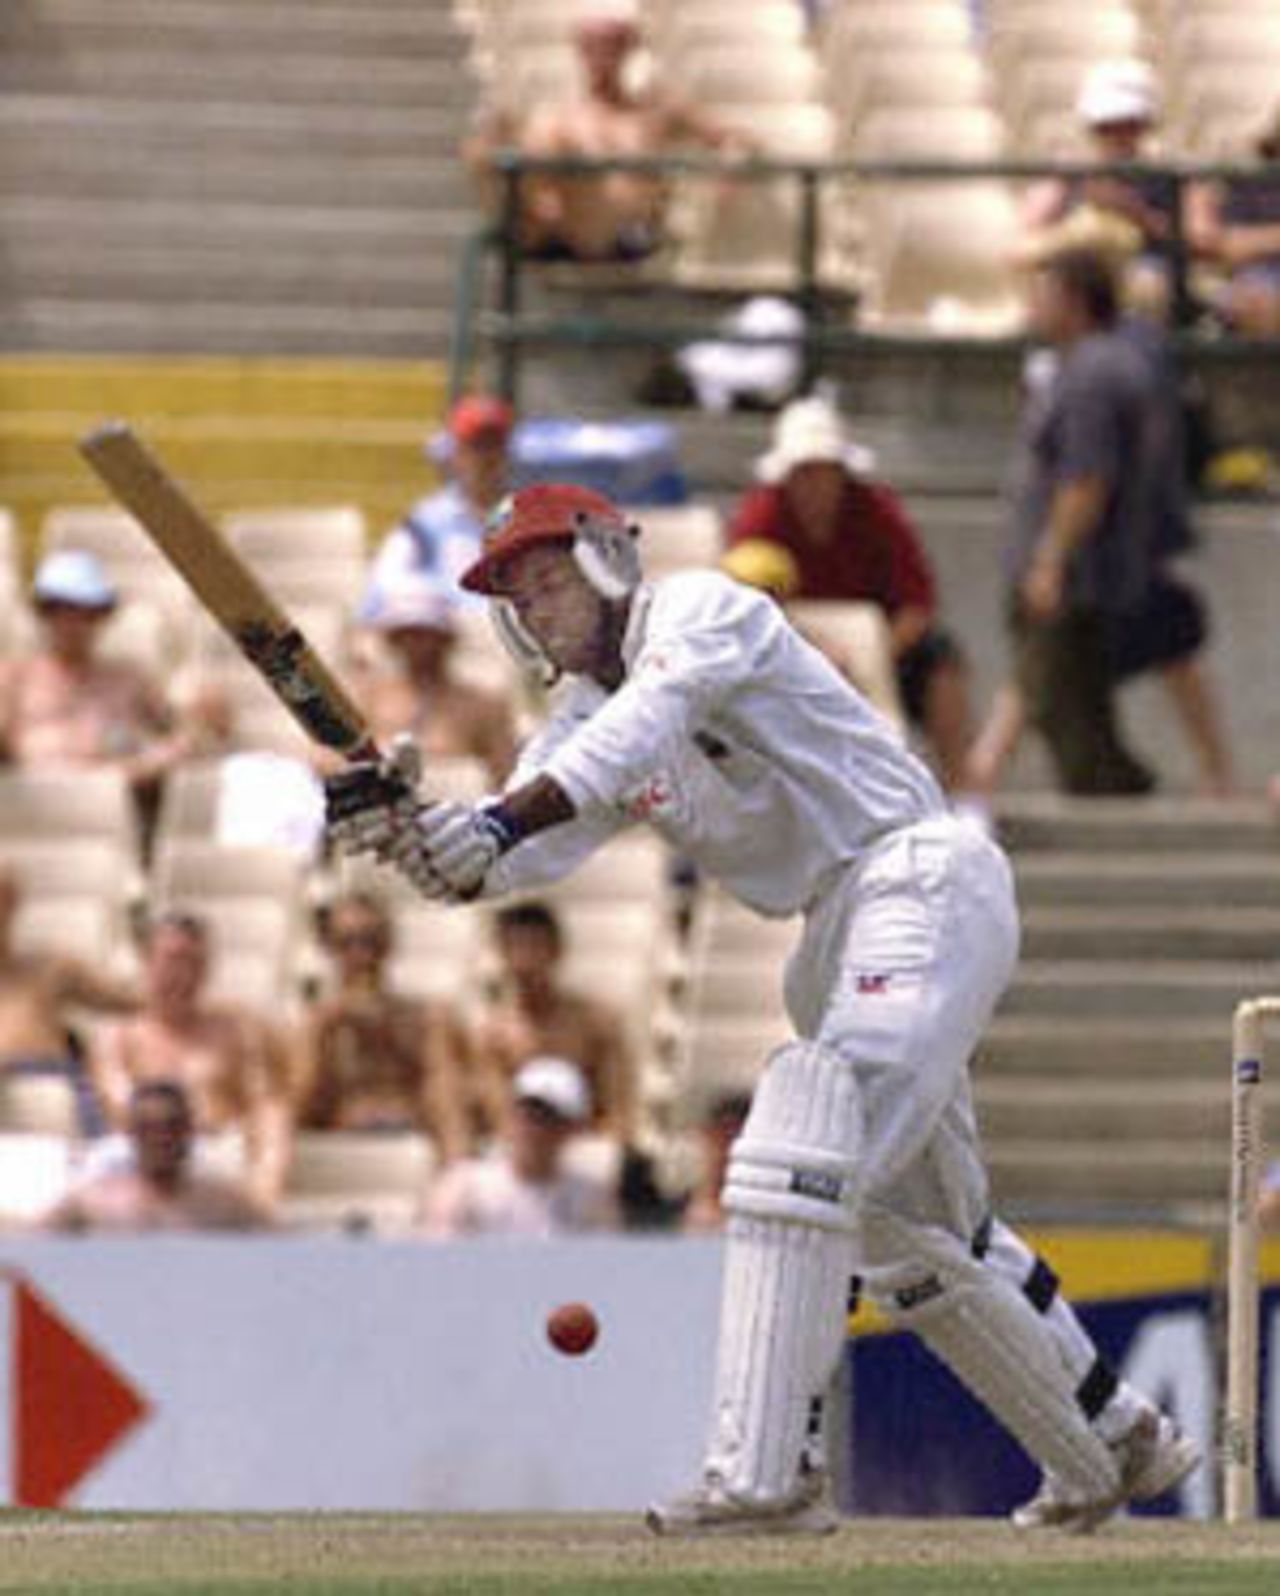 Sherwin Campbell of the West Indies drives a ball off the bowling of Glenn McGrath in the Federation test at the Sydney Cricket ground 05 January 2001. Campbell made 54 before being caught by Australian wicket-keeper Adam Gilchrist off the bowling of Jason Gillespie.